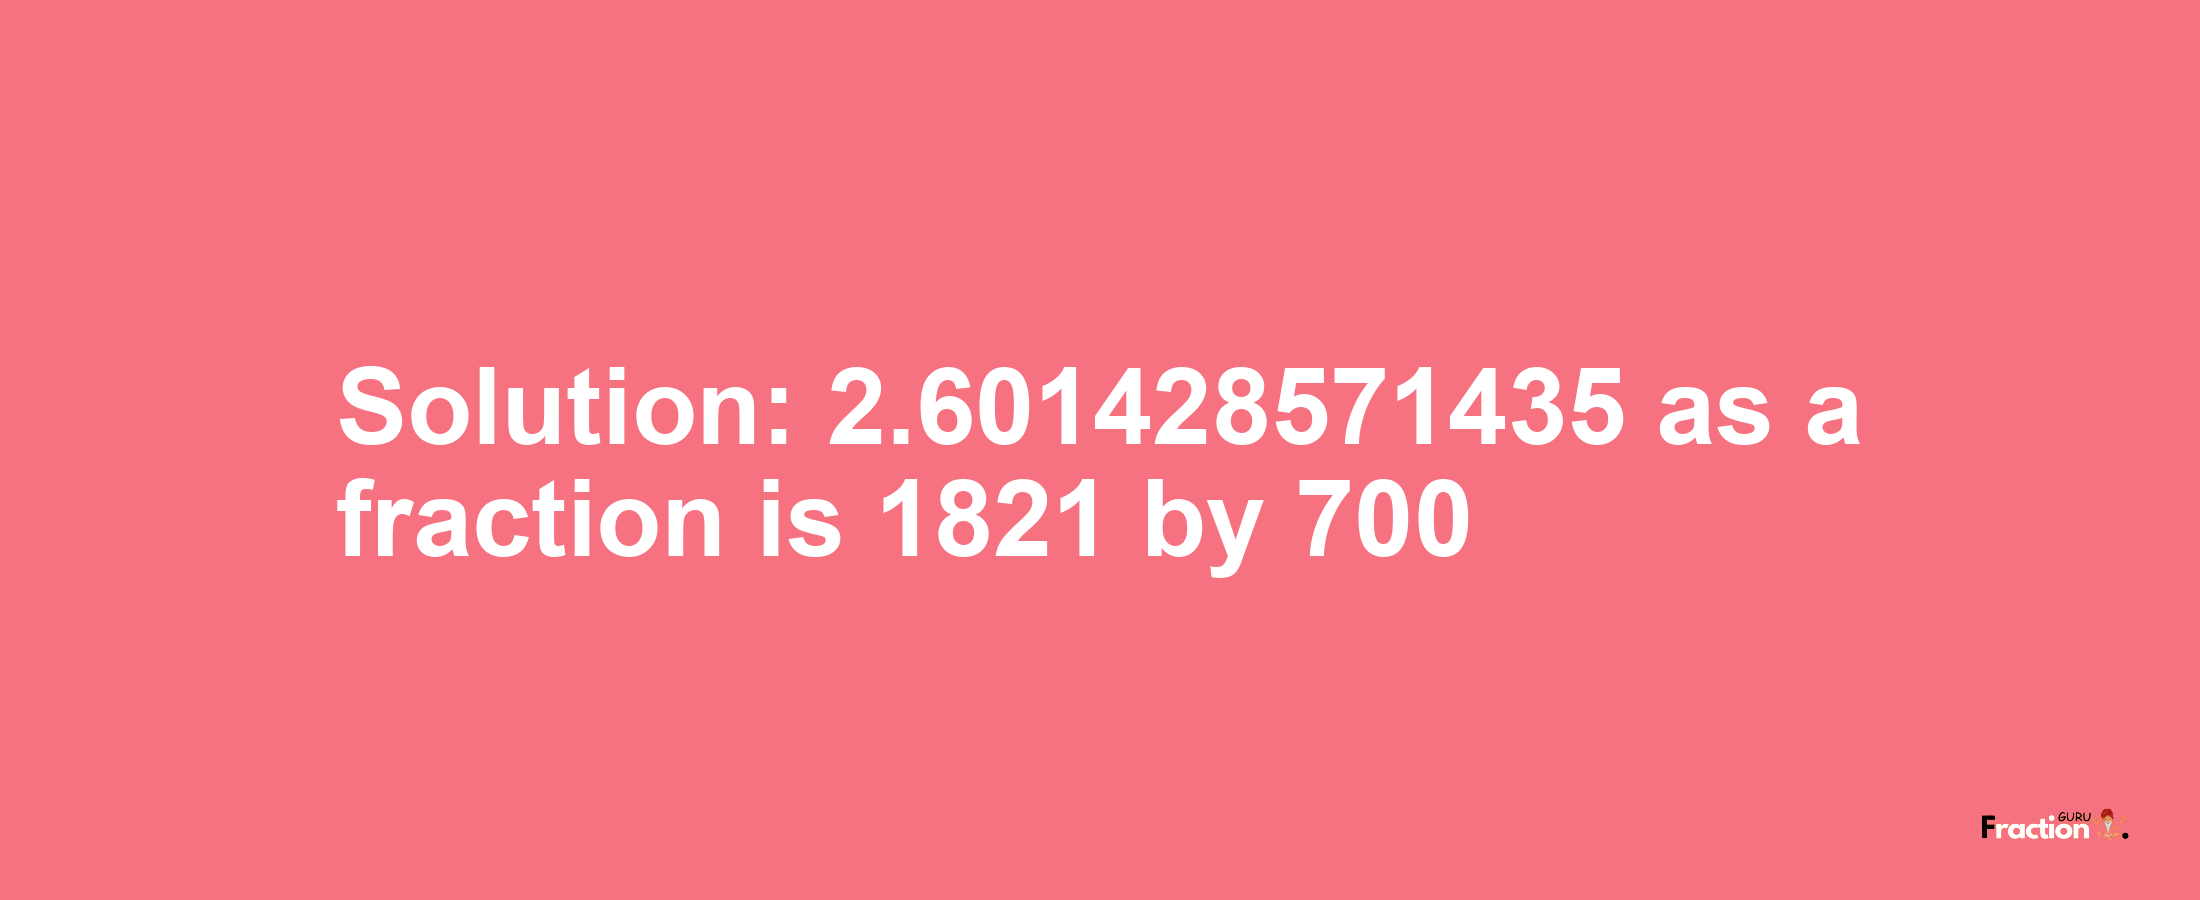 Solution:2.601428571435 as a fraction is 1821/700